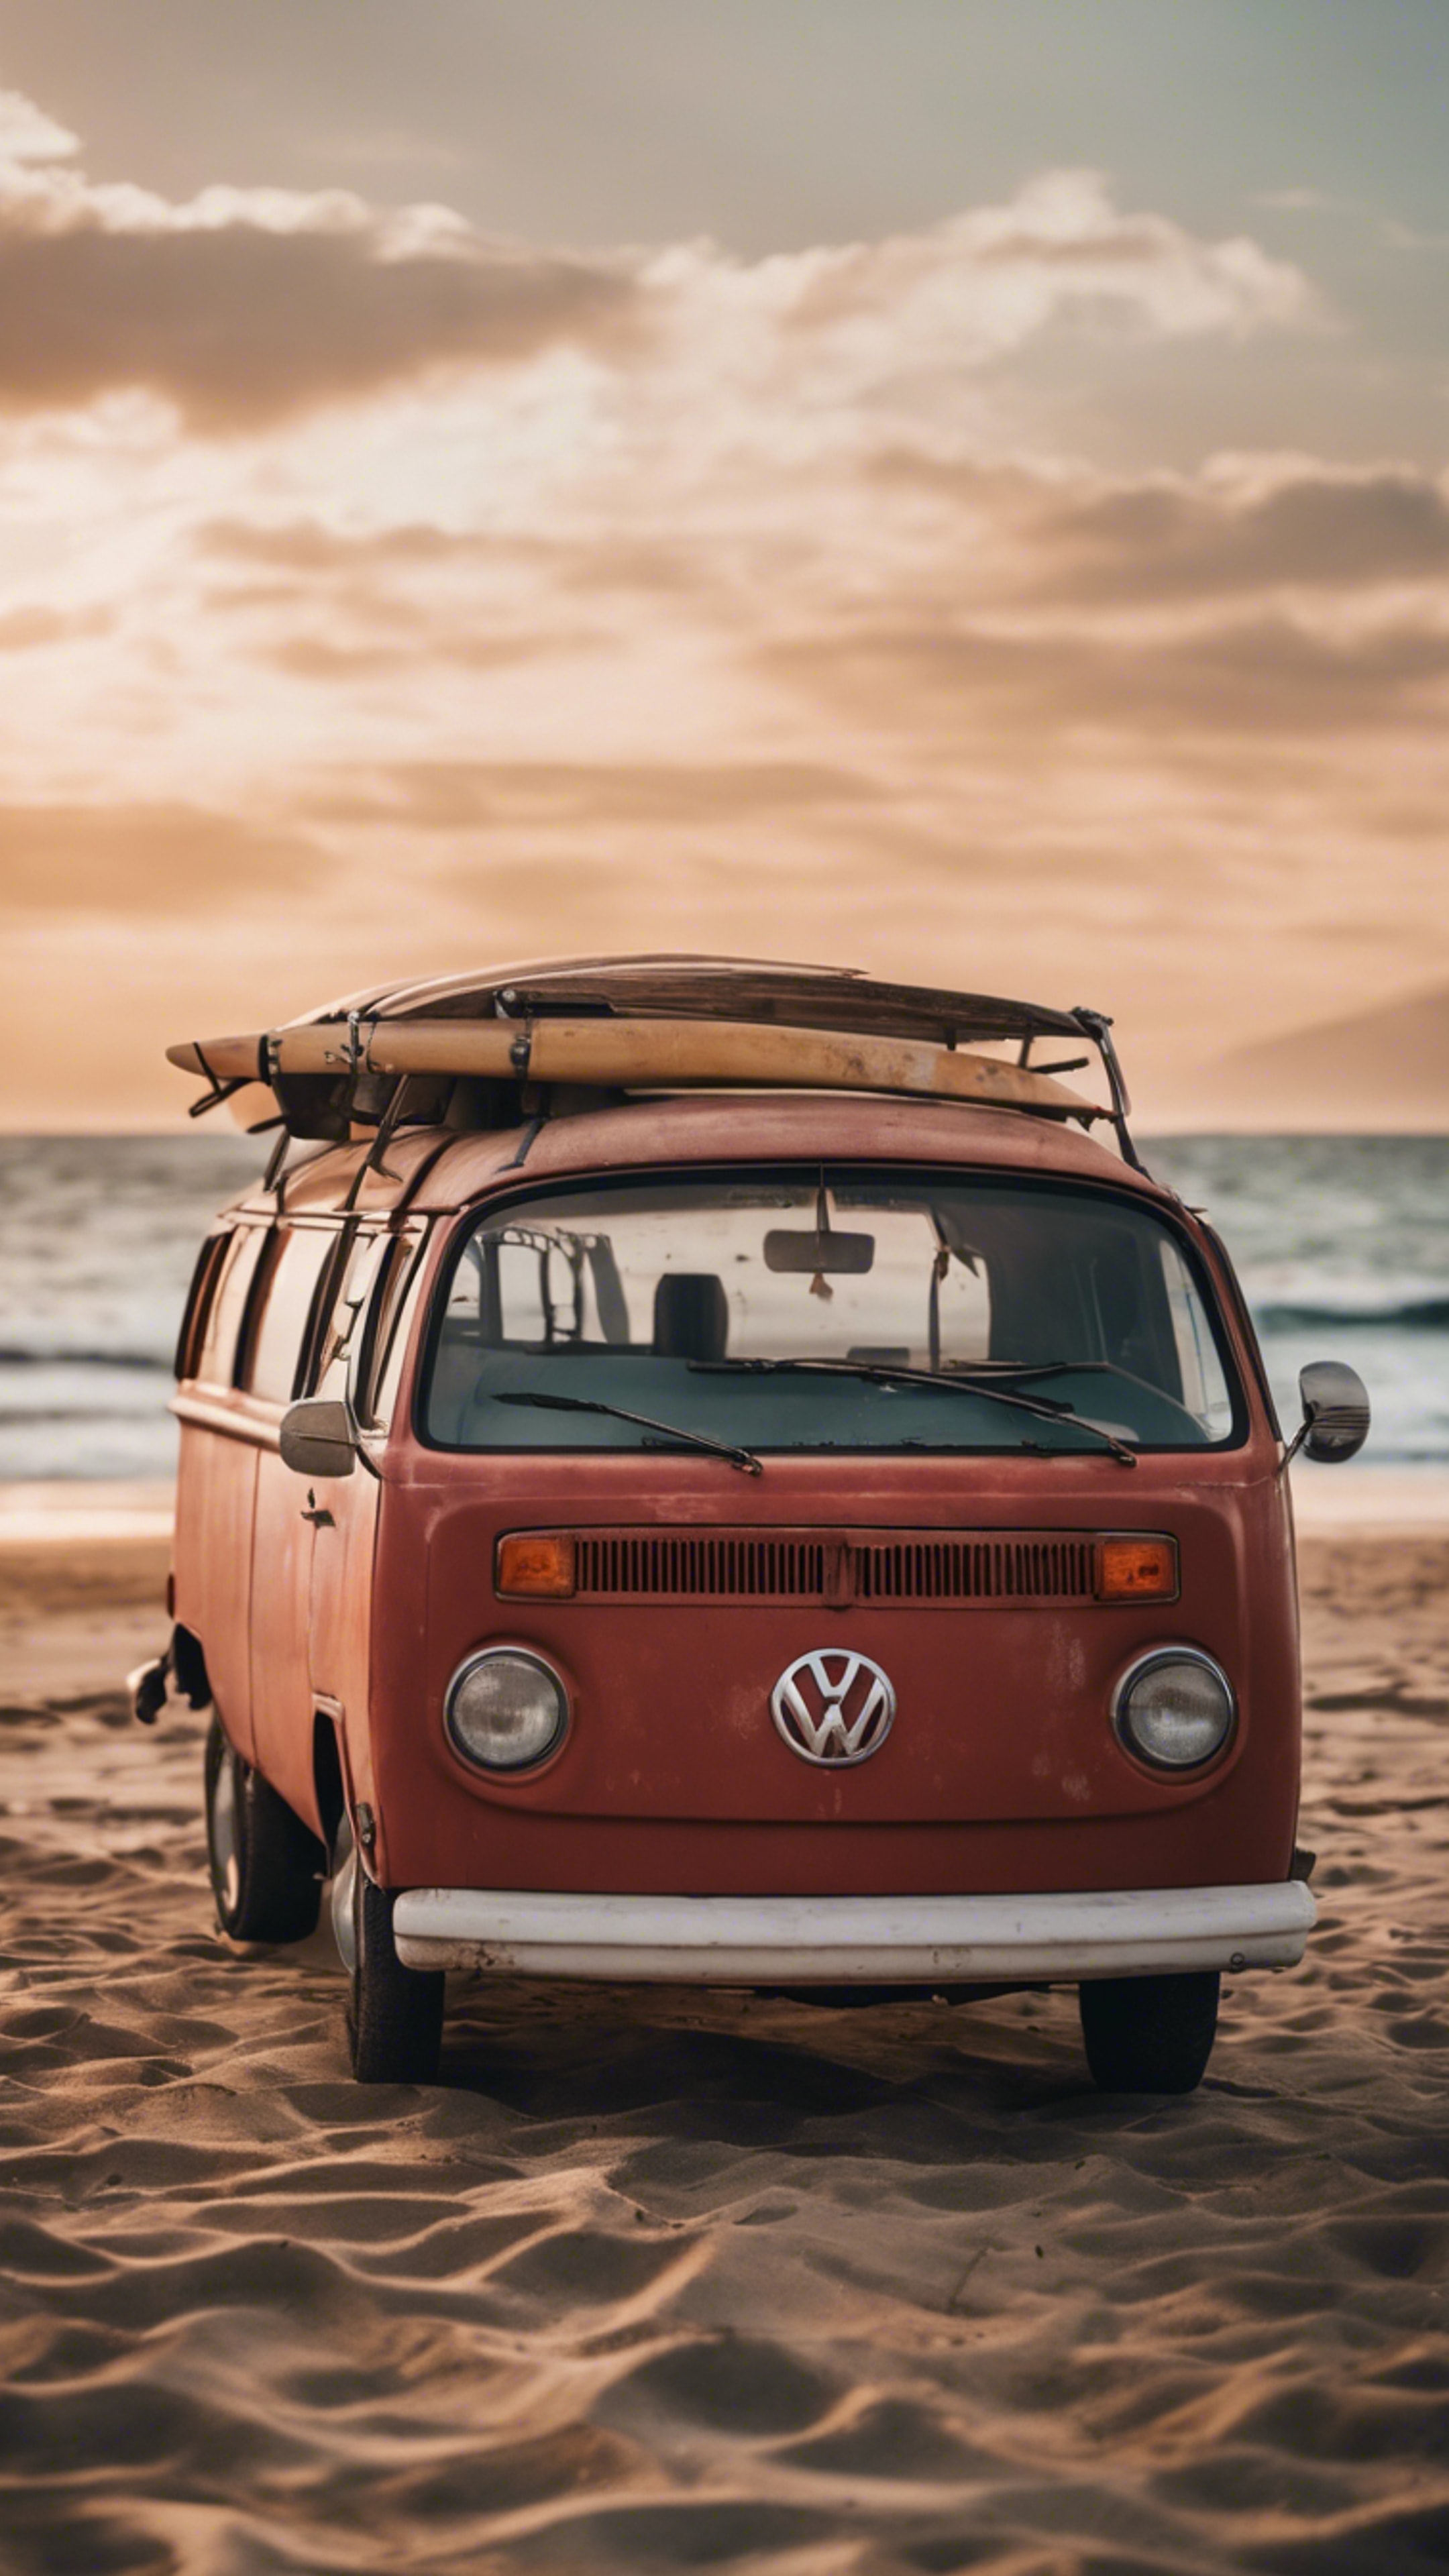 An old, rusted red Volkswagen van parked at a beach with the sunset in the backdrop, surfboards leaning against it. کاغذ دیواری[f96813b3e584499cadbf]